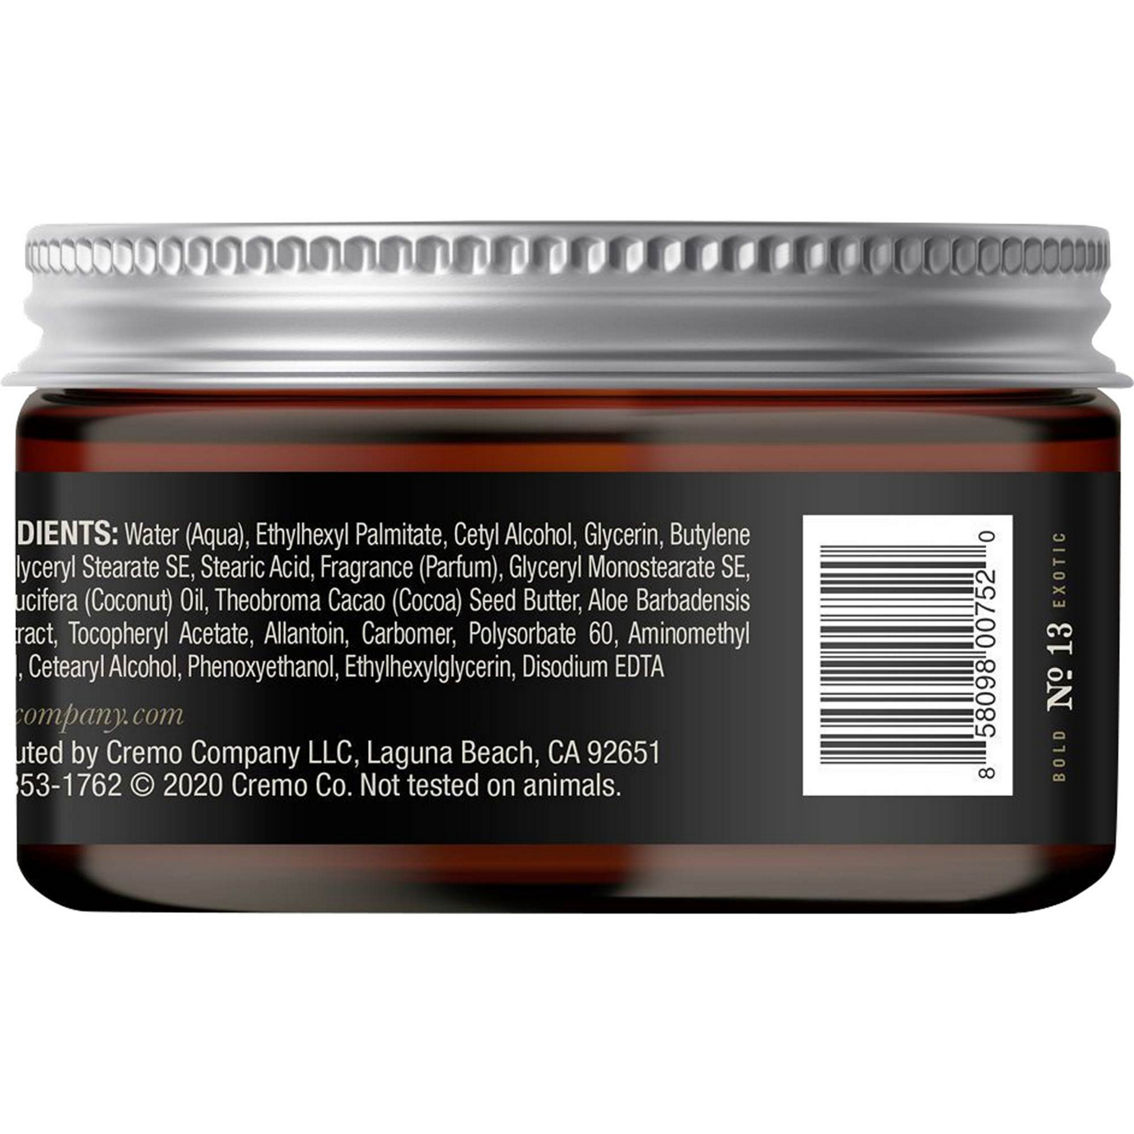 Cremo Reserve Collection Distiller's Blend Beard and Scruff Cream 4 oz. - Image 2 of 3